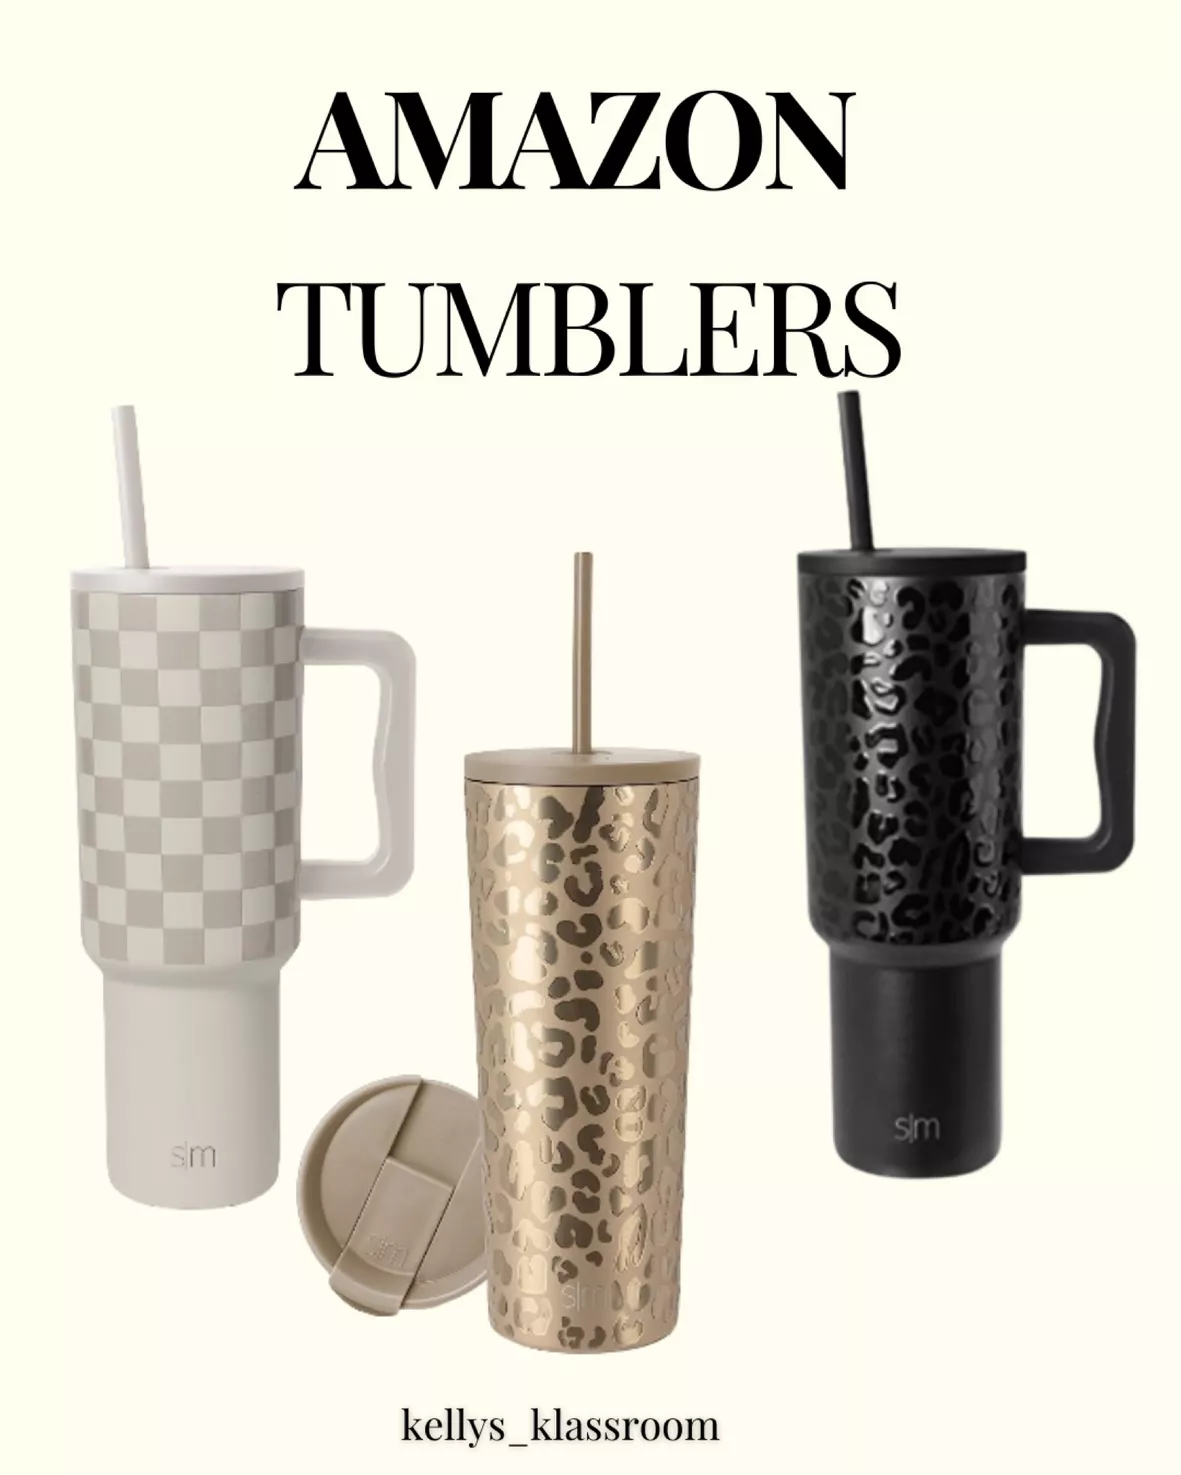 Stanley Tumbler Lookalikes (+ Where to Find the REAL Thing!)